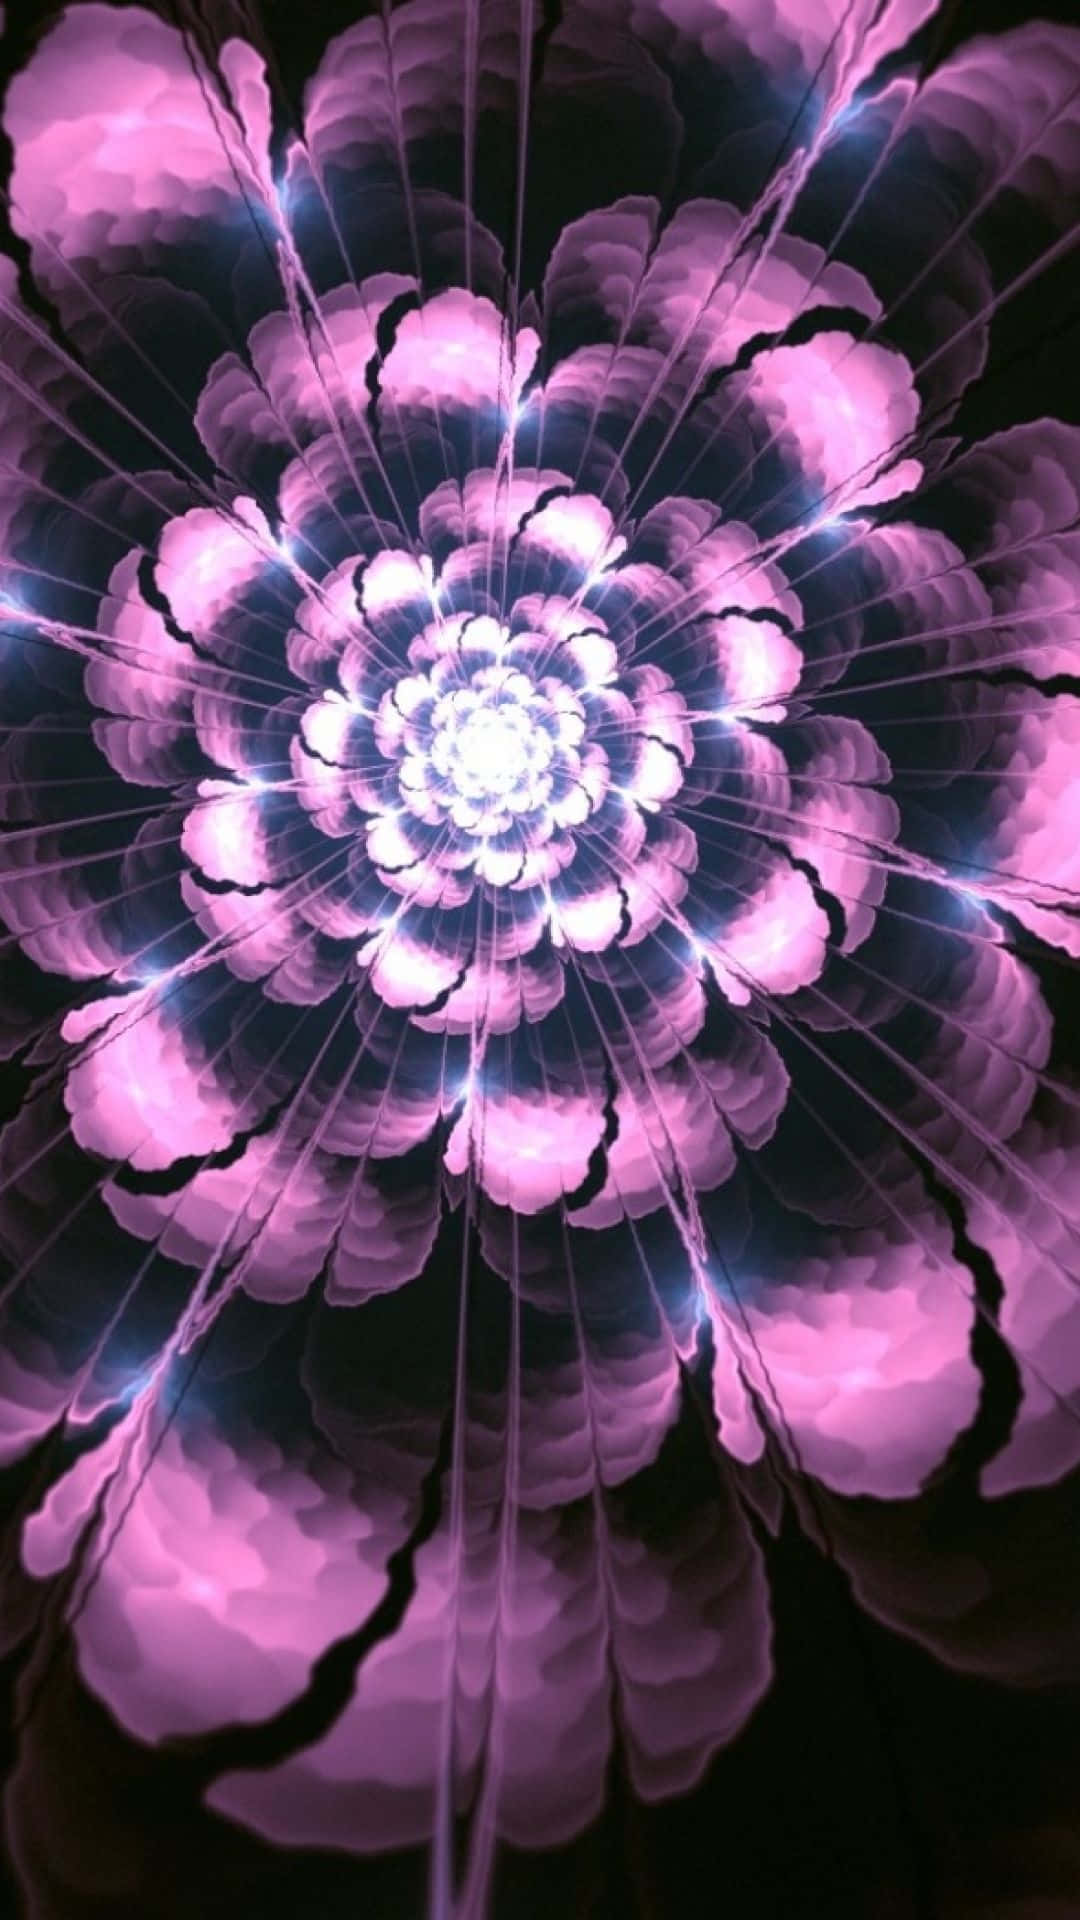 A Purple Flower With Light